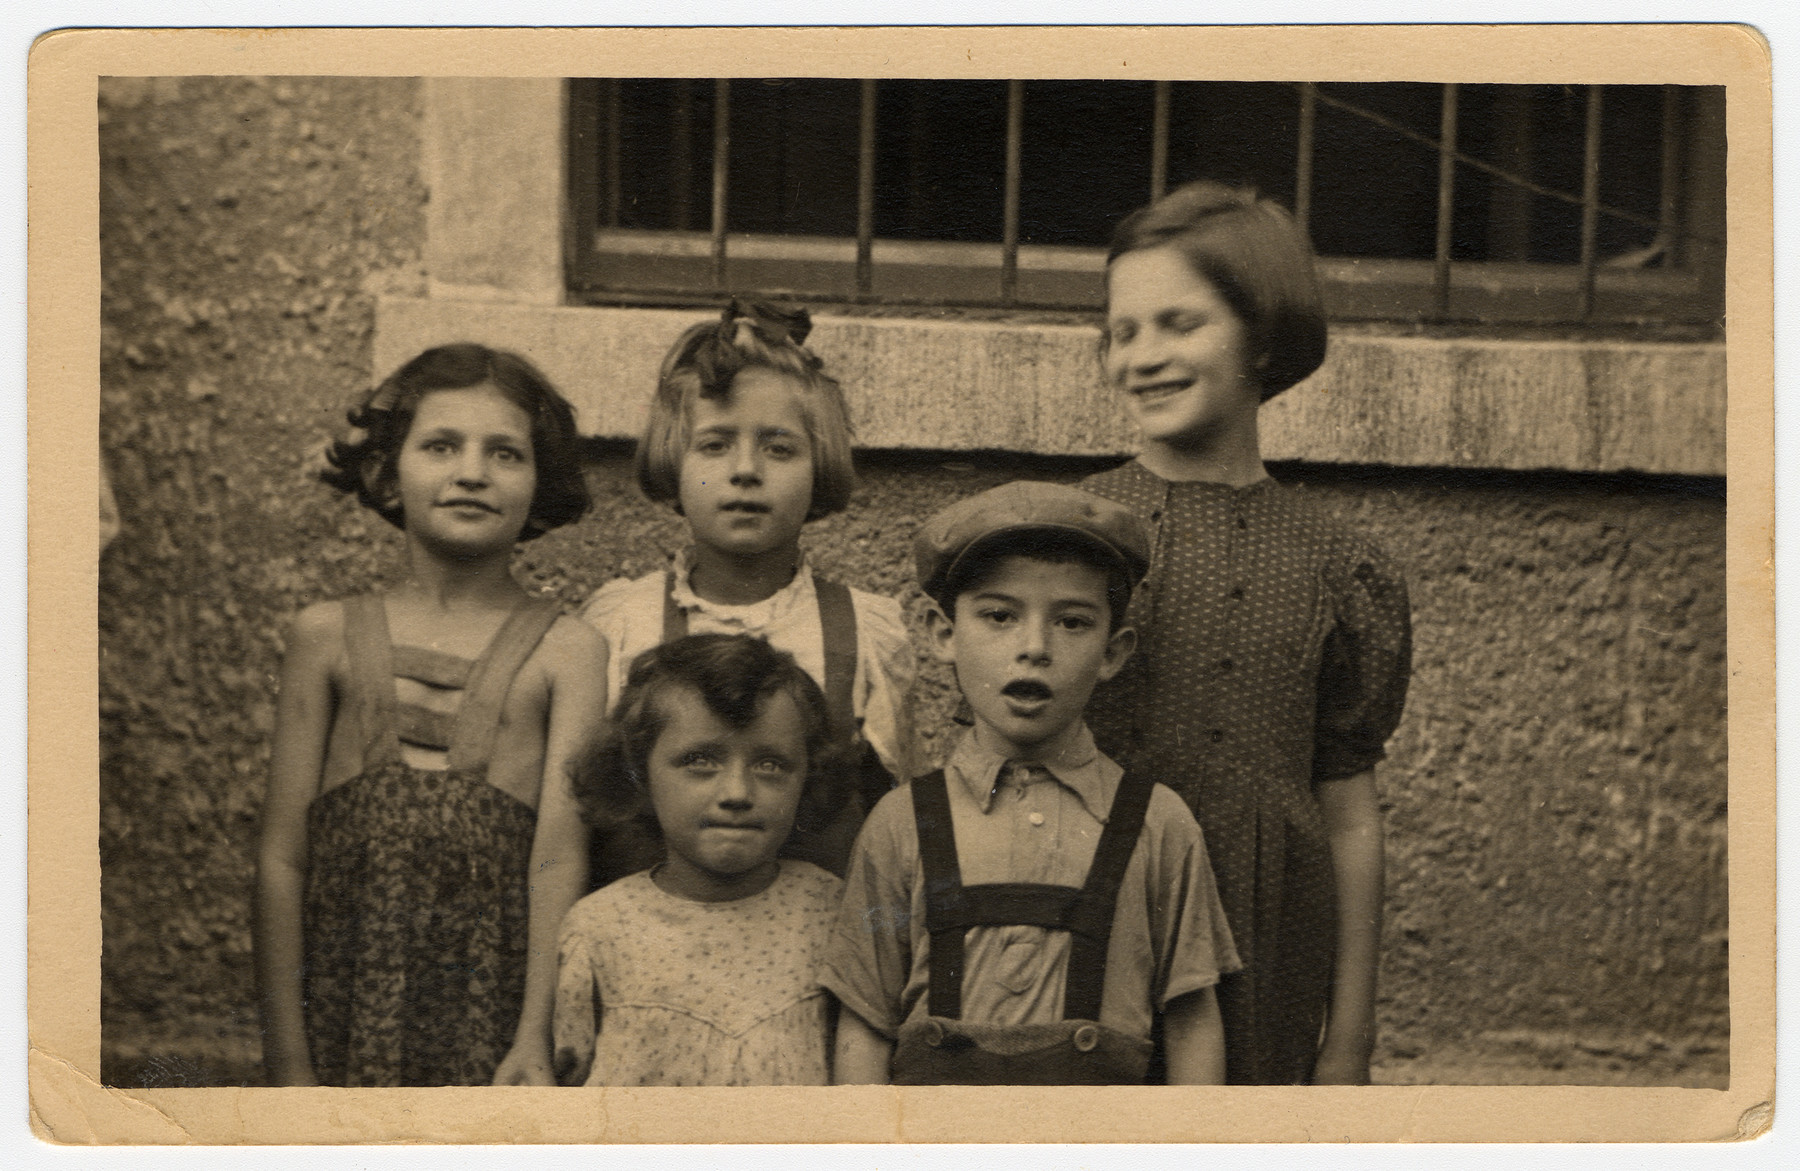 A group of children in the Salzburg Displaced Persons Camp.

Among those pictured are Lusia Fenster (later Lucy Gertner), front row left; Channah Kaplan (later Charlotte Borofsky) on the far left; and Shainka Kaplan (later Janet Wenitsky) on the far right.